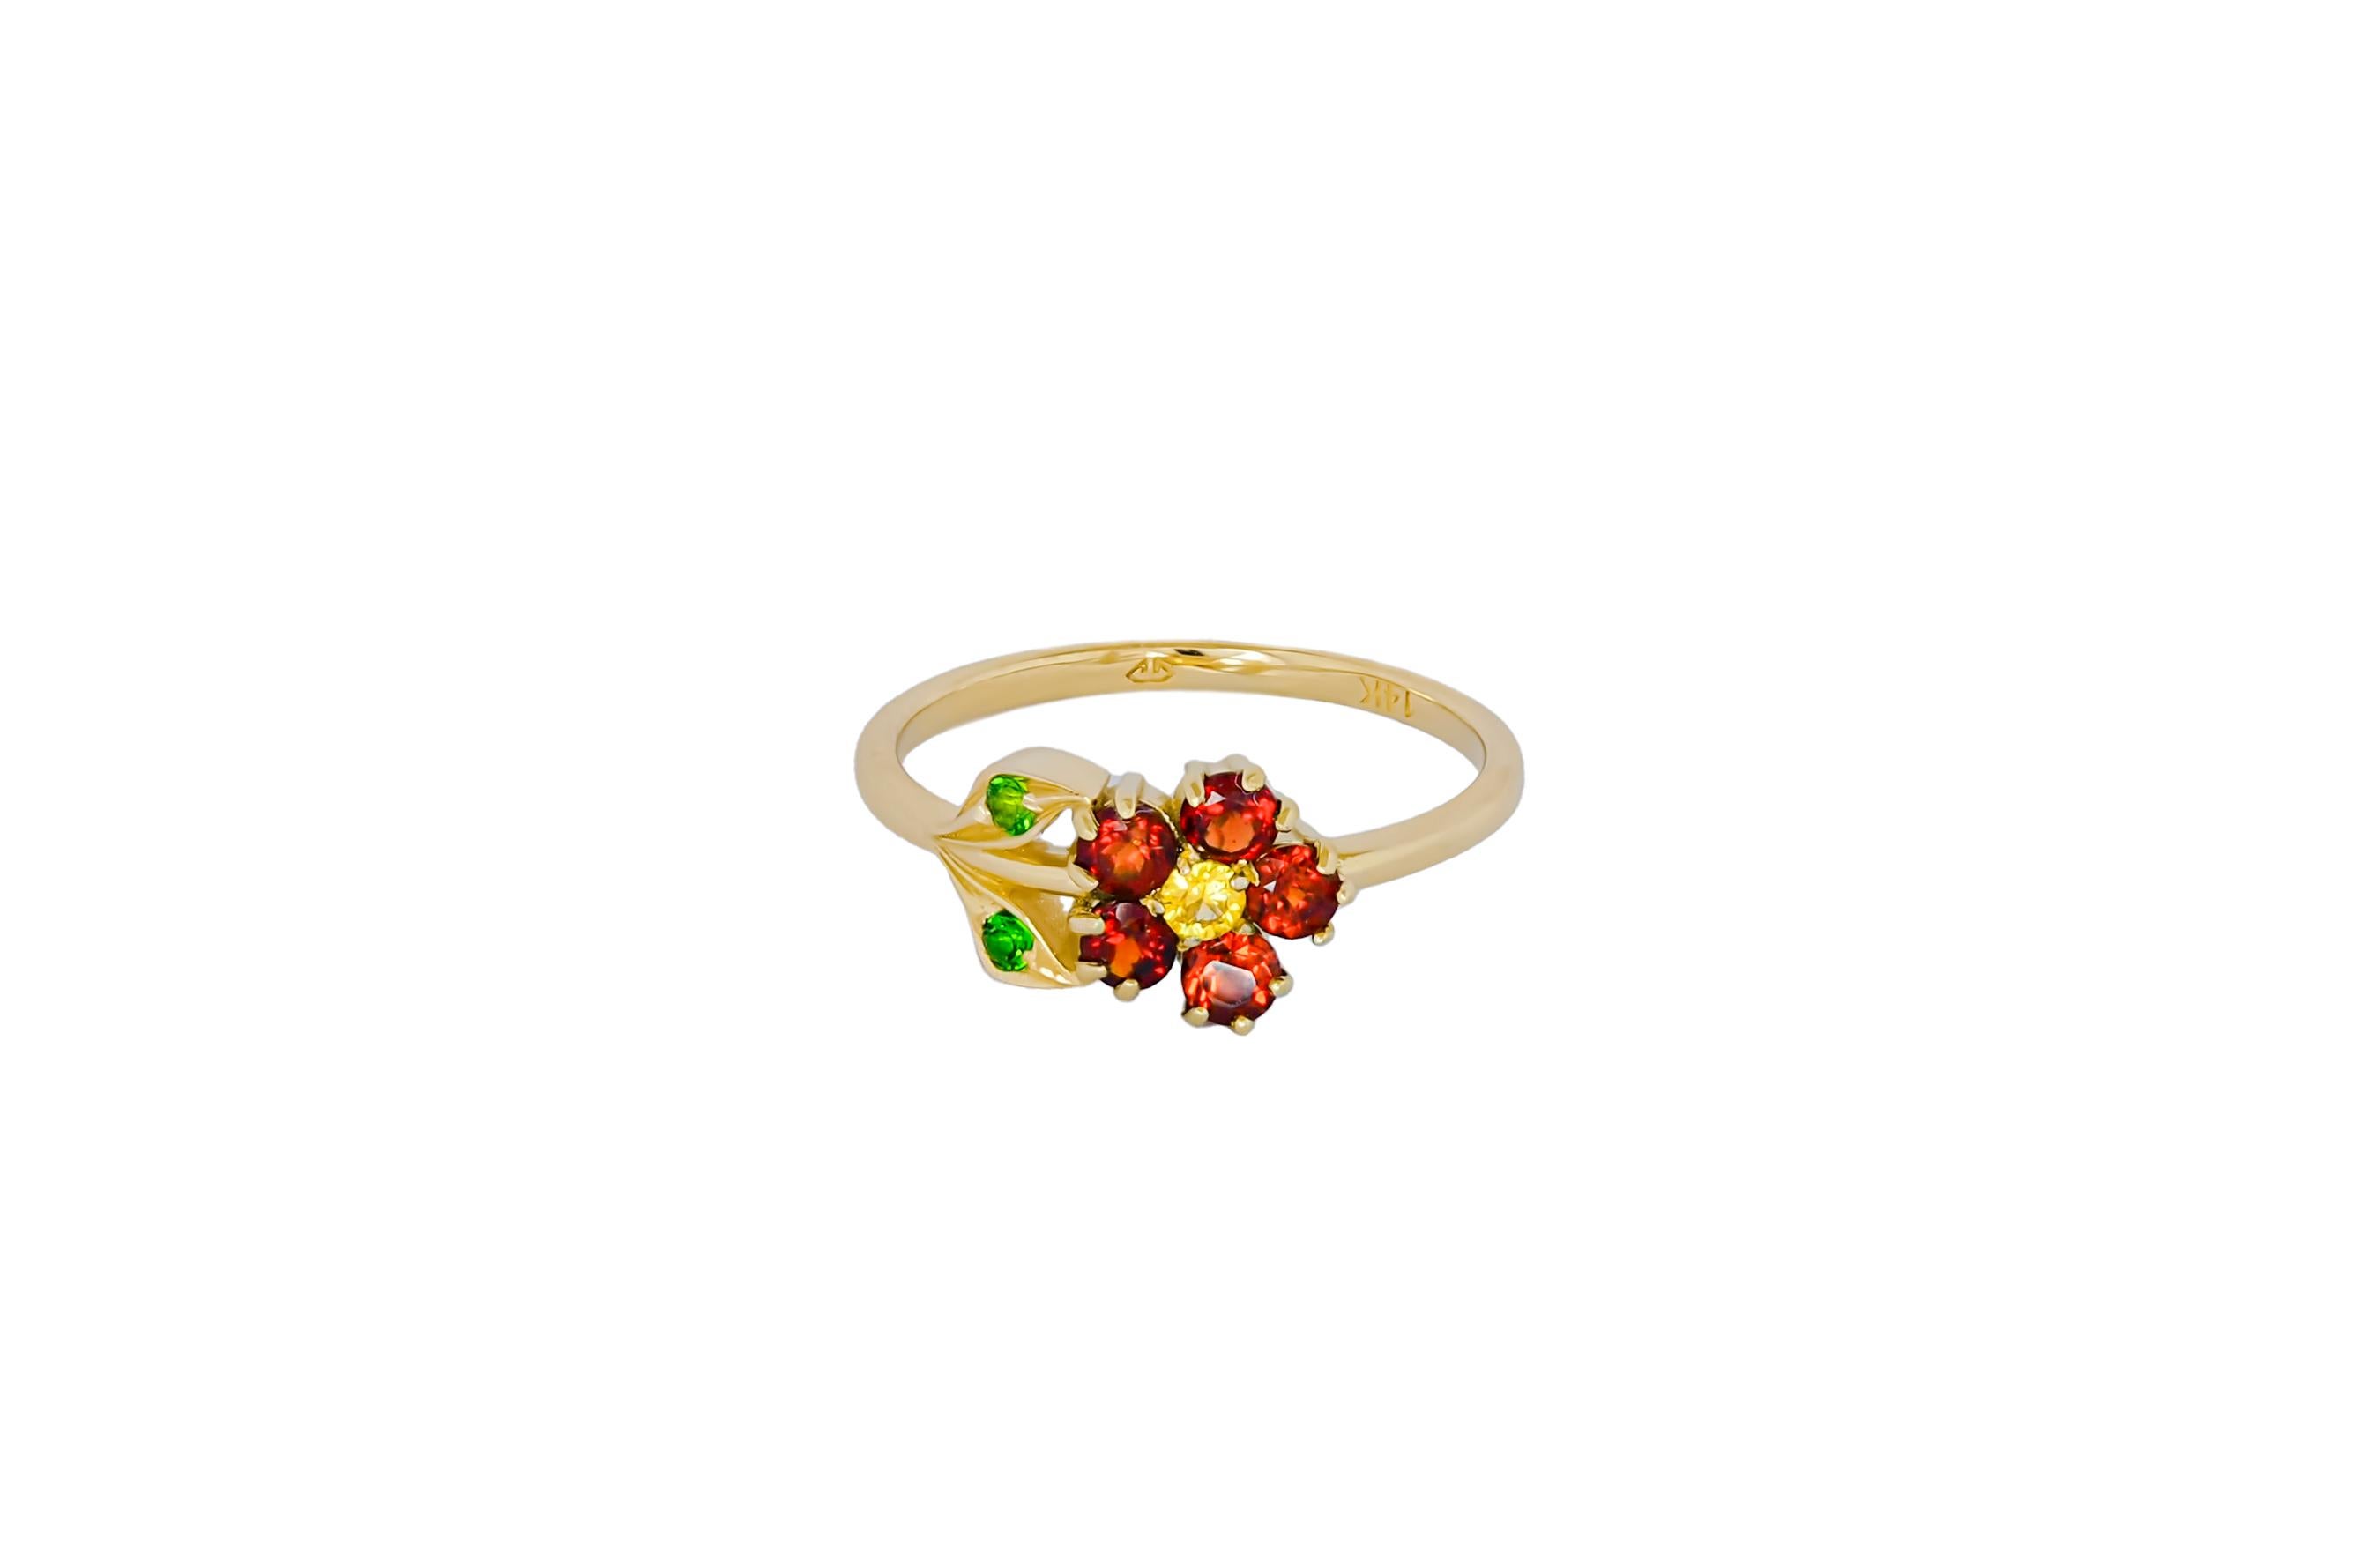 Flower Ring in 14 Karat Gold, Sapphire, Garnet and Chrome Diopsides Ring.  For Sale 5